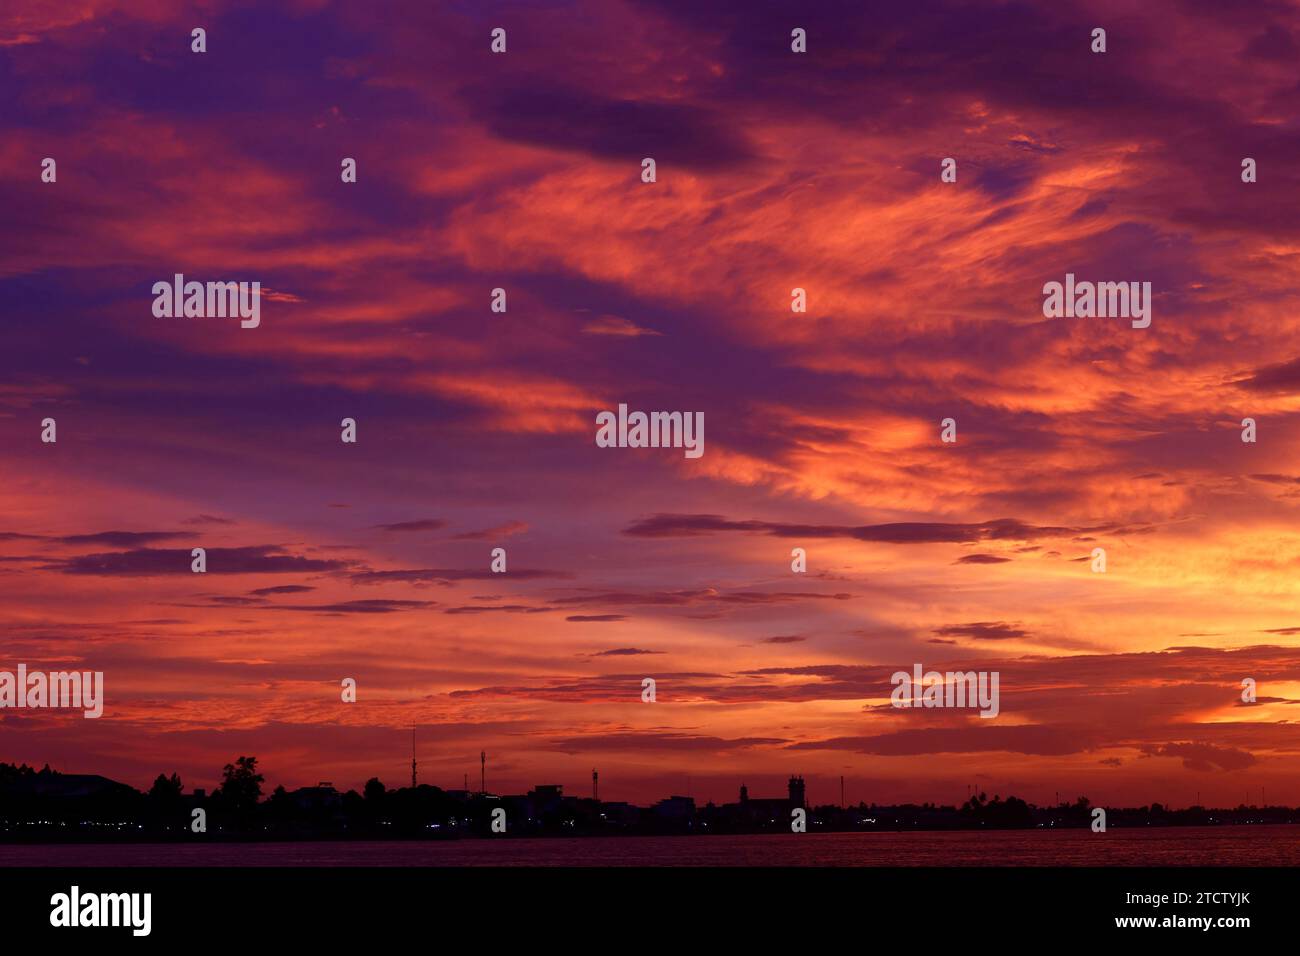 Orange clouds and sky at sunset. Stock Photo